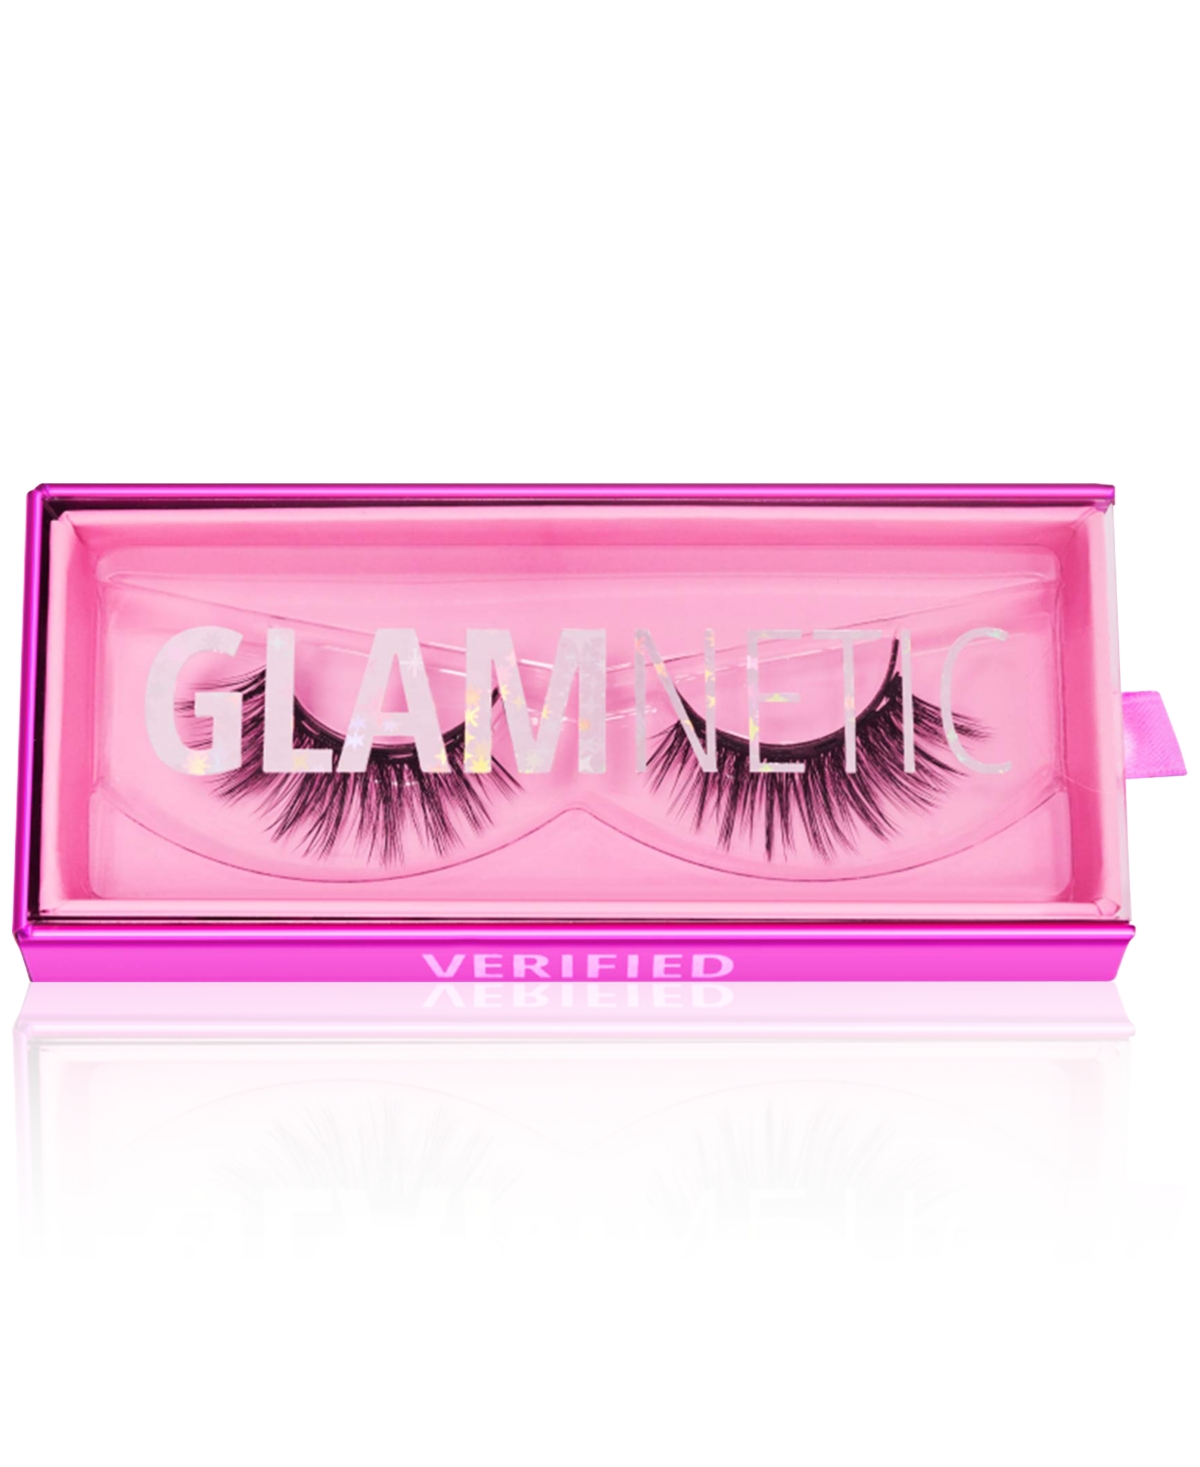 Glamnetic Magnetic Lashes - Verified In Black